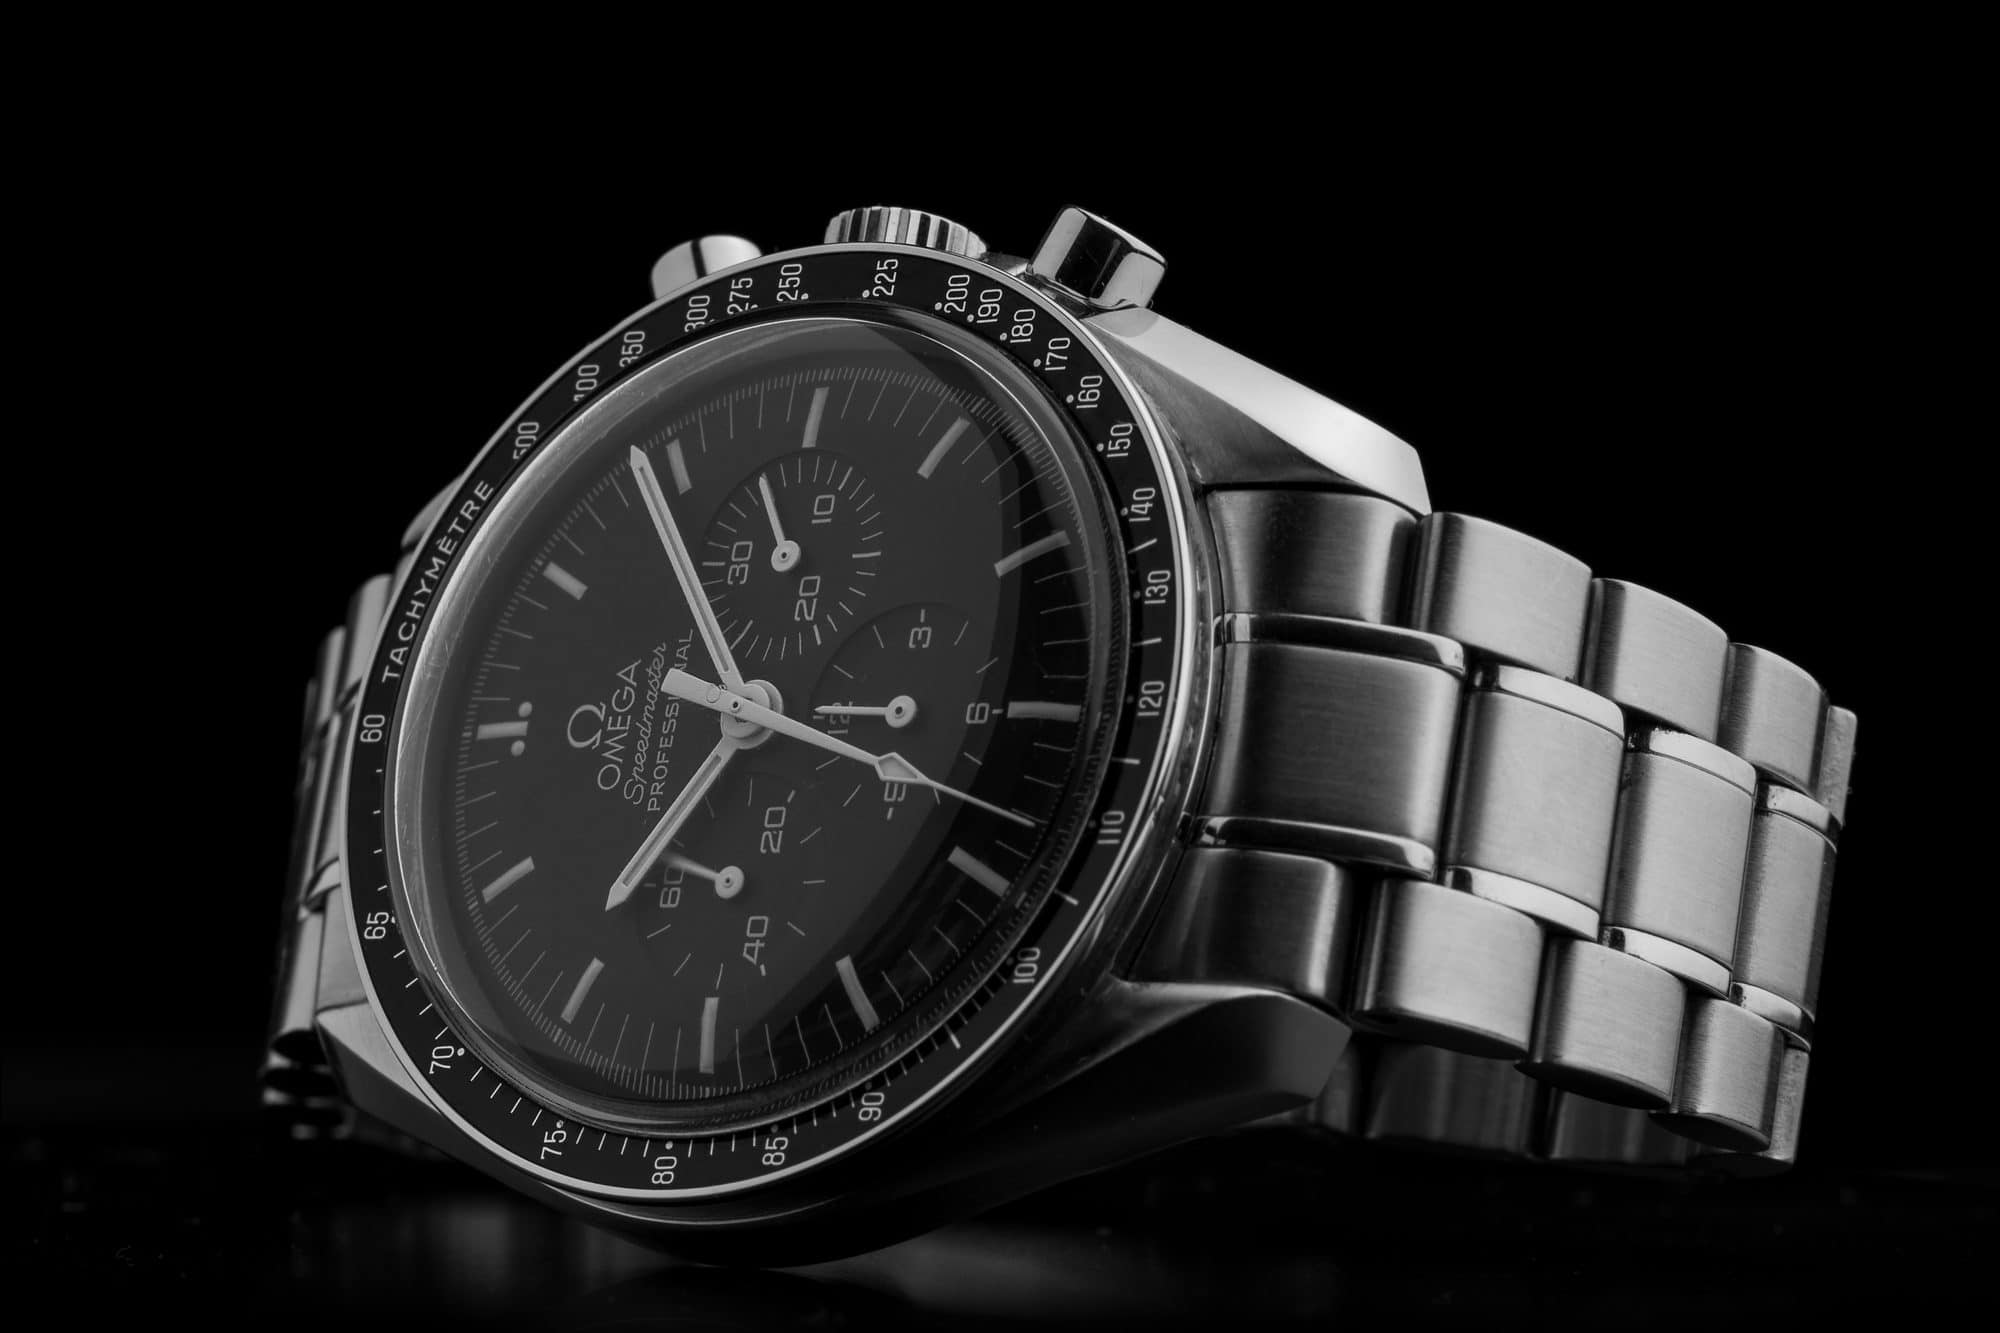 BOLOGNA, ITALY - OCTOBER 12, 2017: Omega Speedmaster Professional watch. Omega has been creating watches since the 19th century and was the first watch on the Moon. Illustrative editorial.